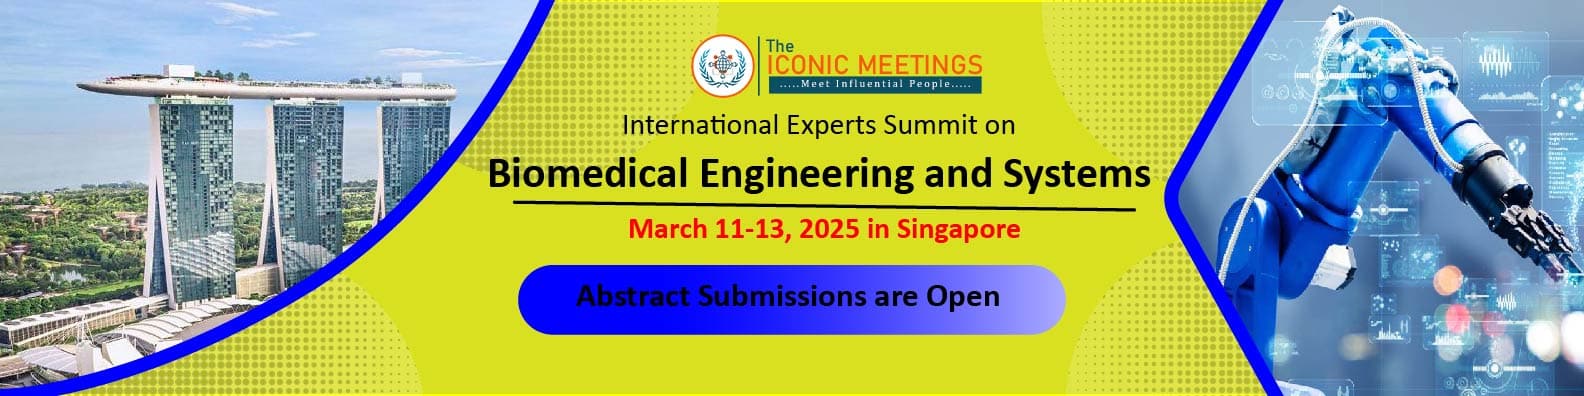 International Experts Summit on Biomedical Engineering and Systems